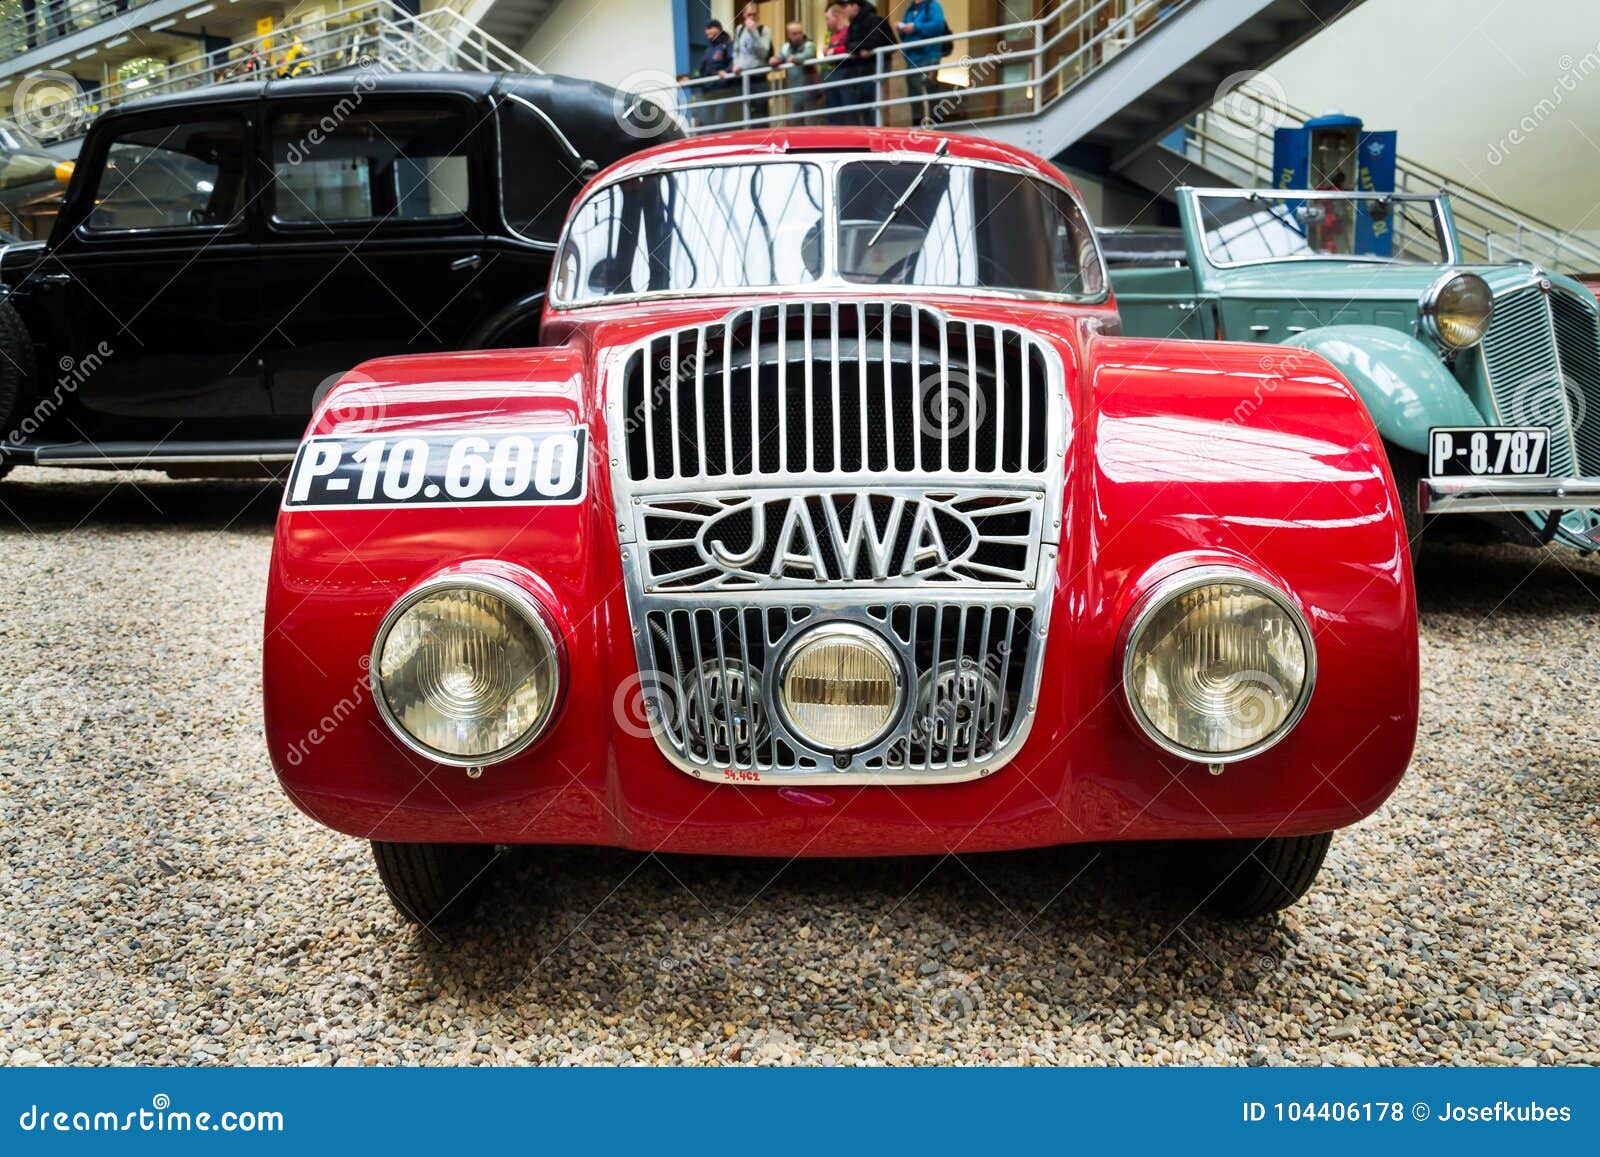  Jawa  750 Racing Car  From 1935 Stands In National Technical 